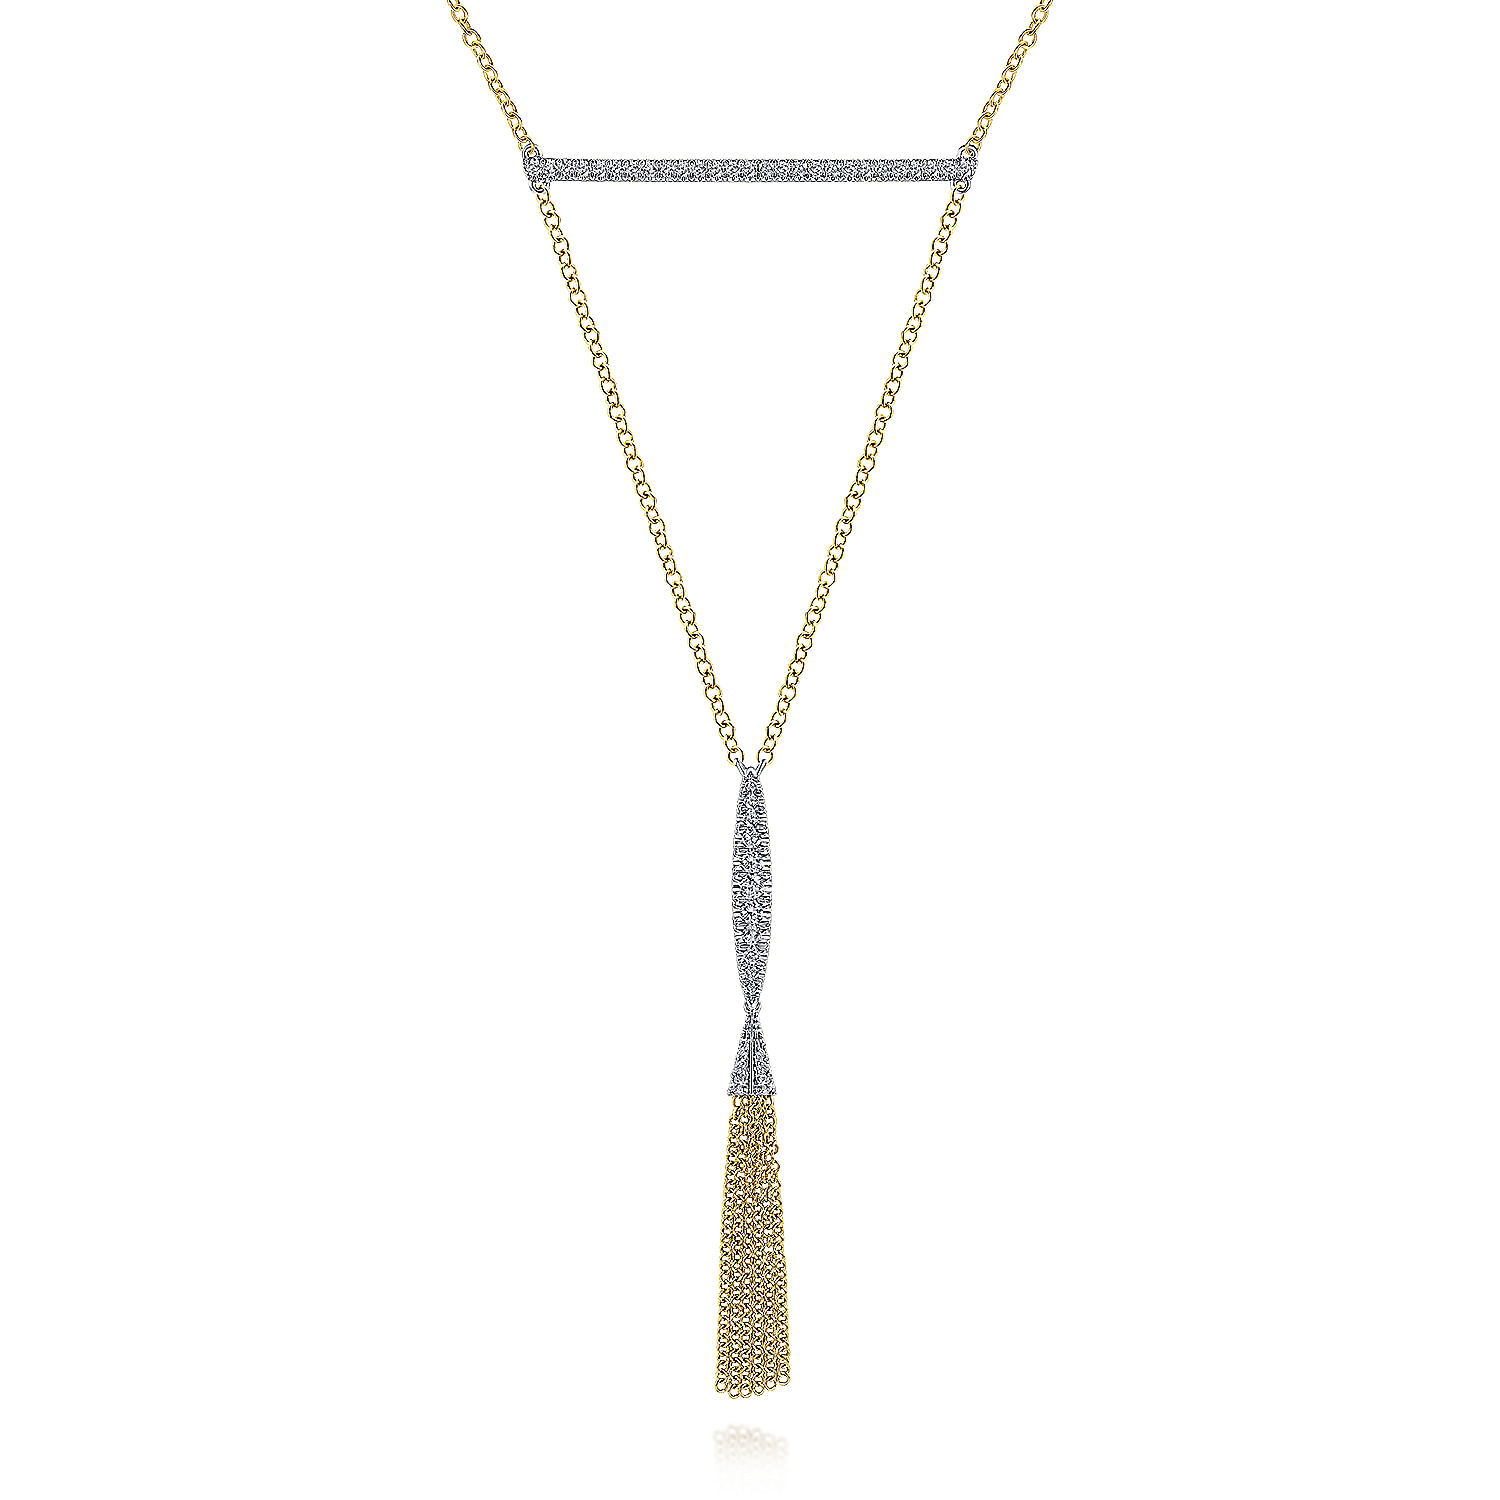 27 inch 14K White Yellow Gold Pavé Diamond Bar and Y Tassel Necklace